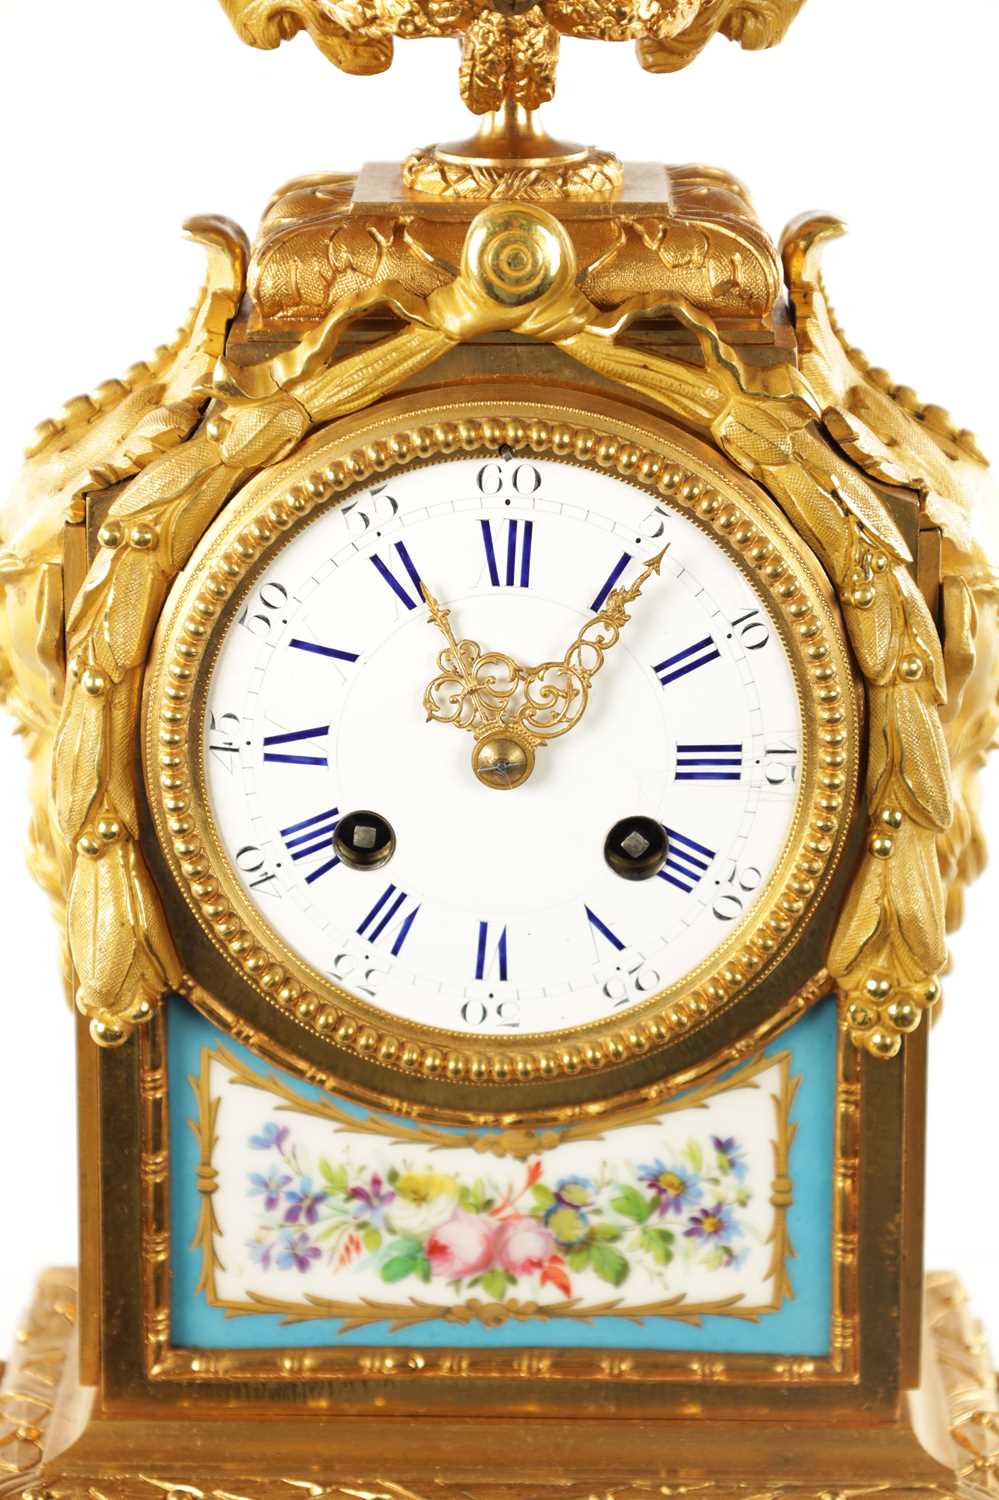 A LATE 19TH CENTURY FRENCH PORCELAIN PANELLED ORMOLU MANTEL CLOCK - Image 3 of 10